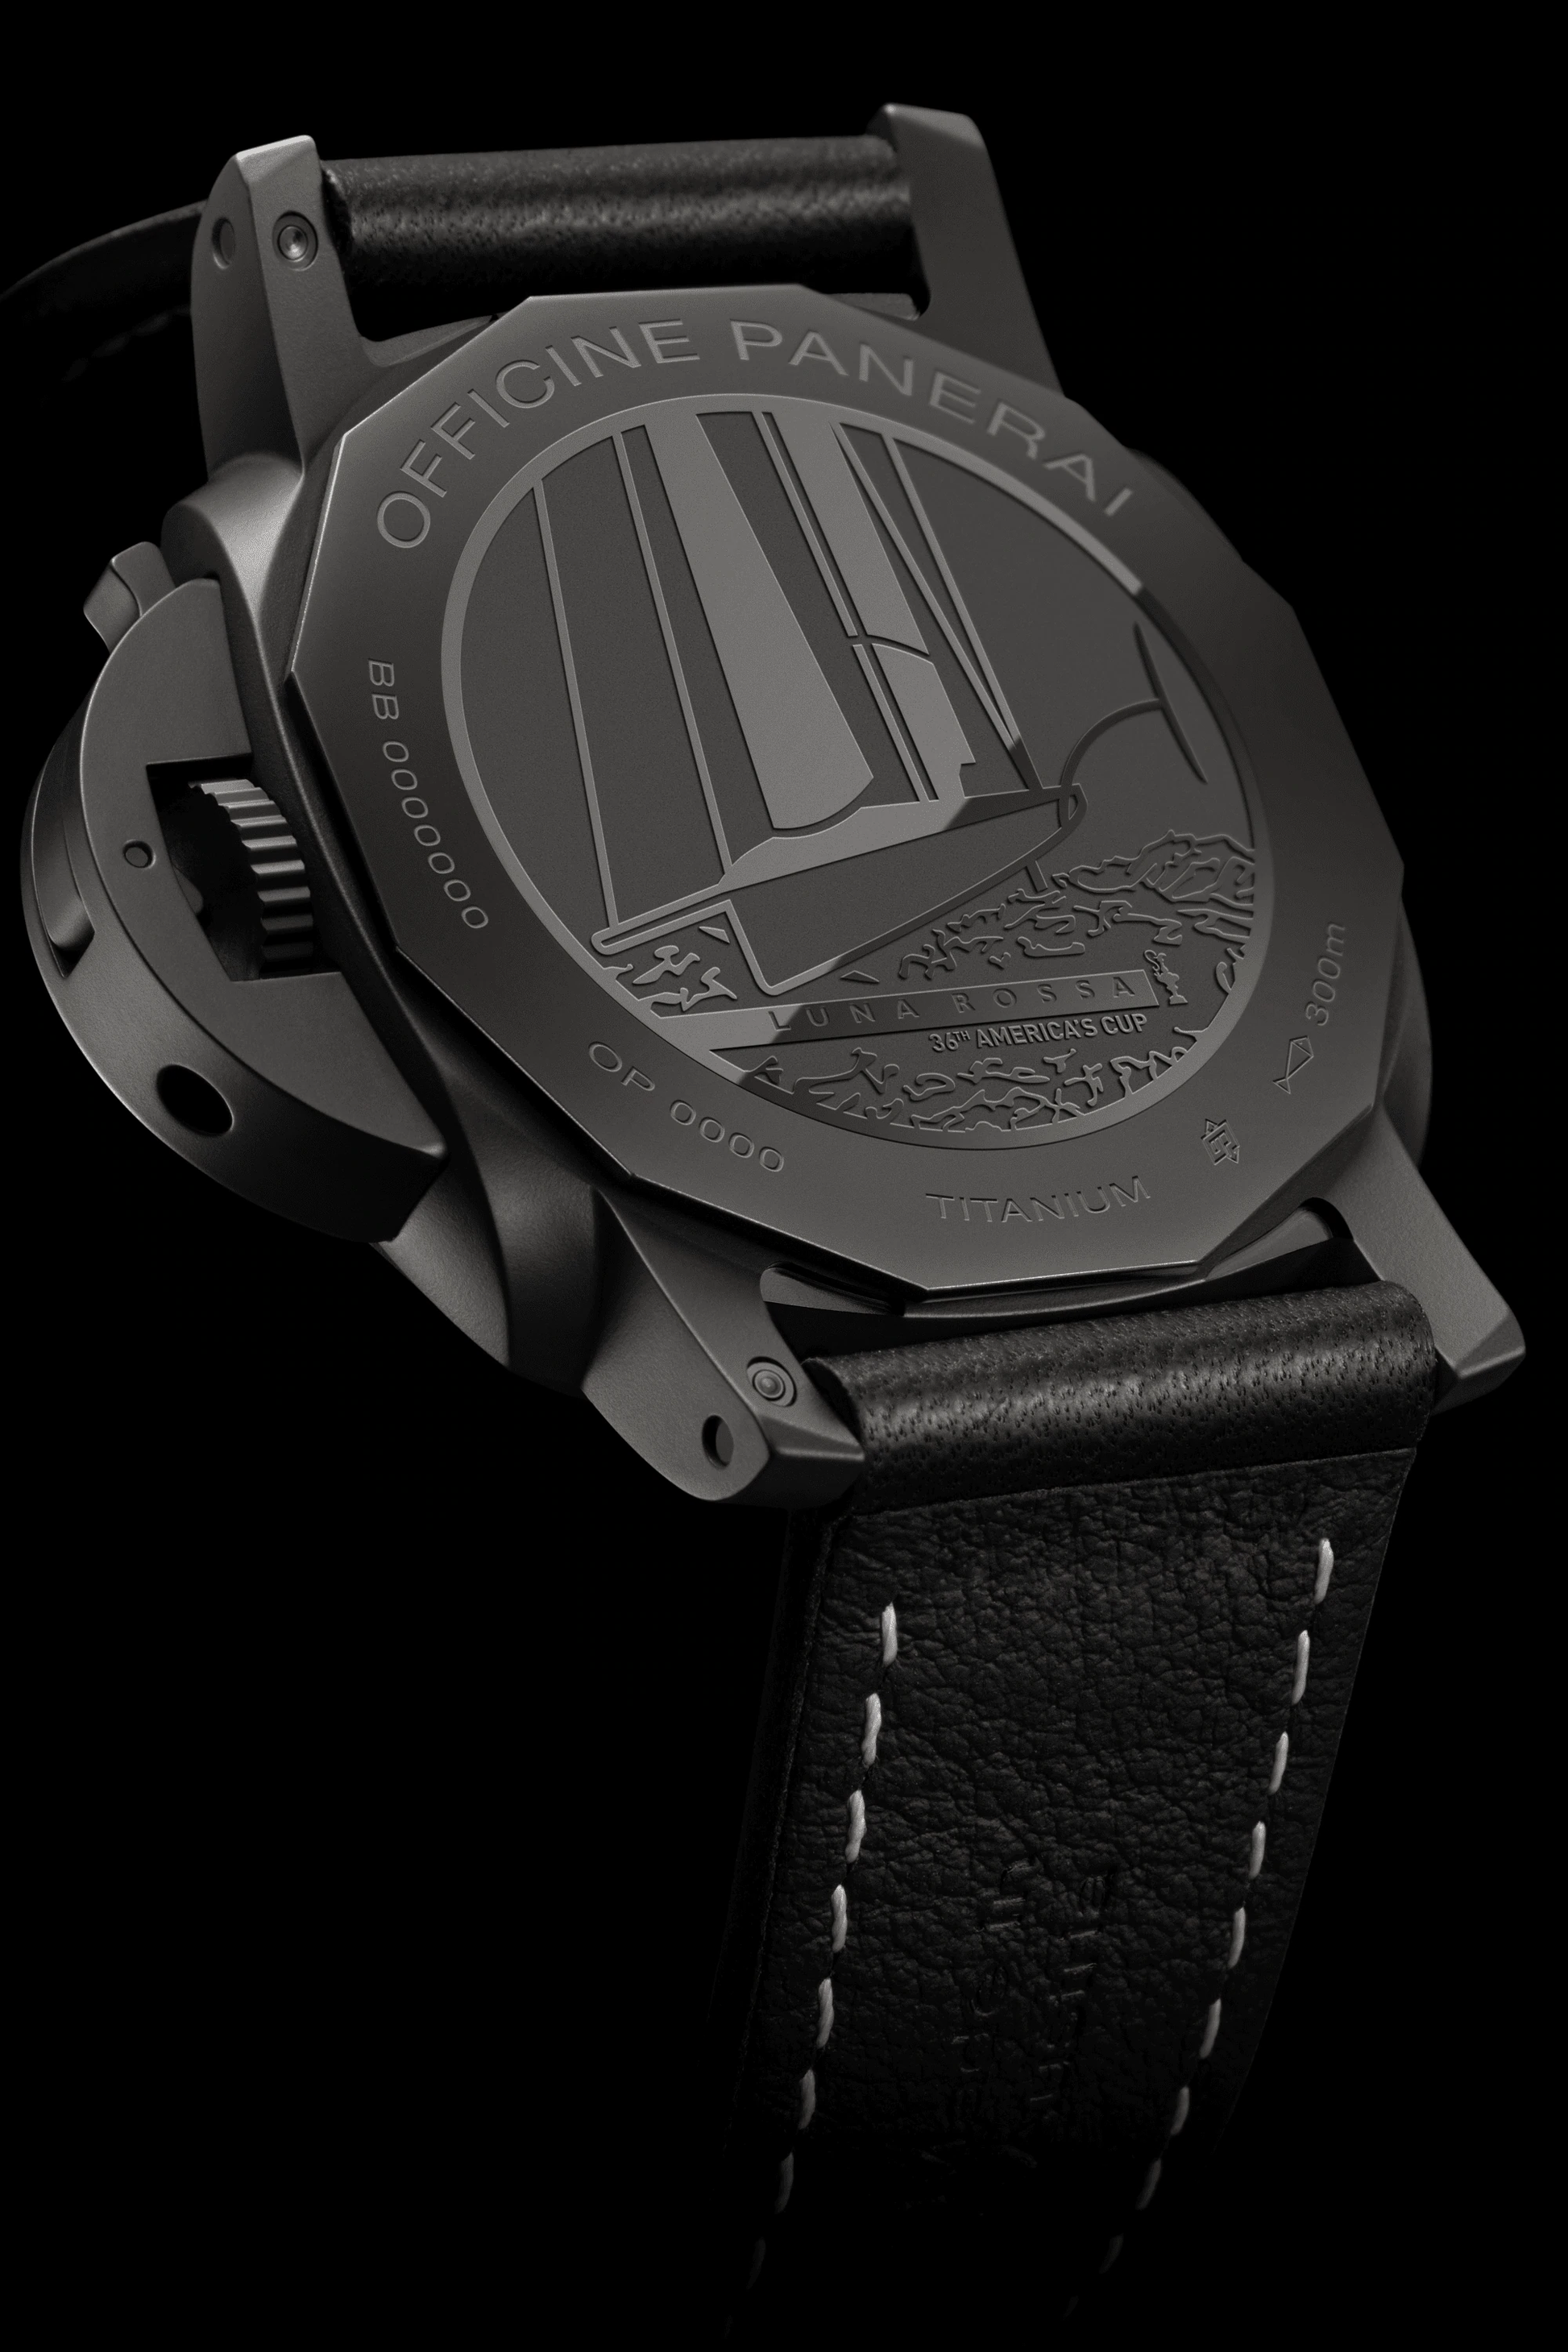 Panerai Luminor Luna Rossa GMT - 44mm, Ref# PAM01036, instantly recognizable crown protector 